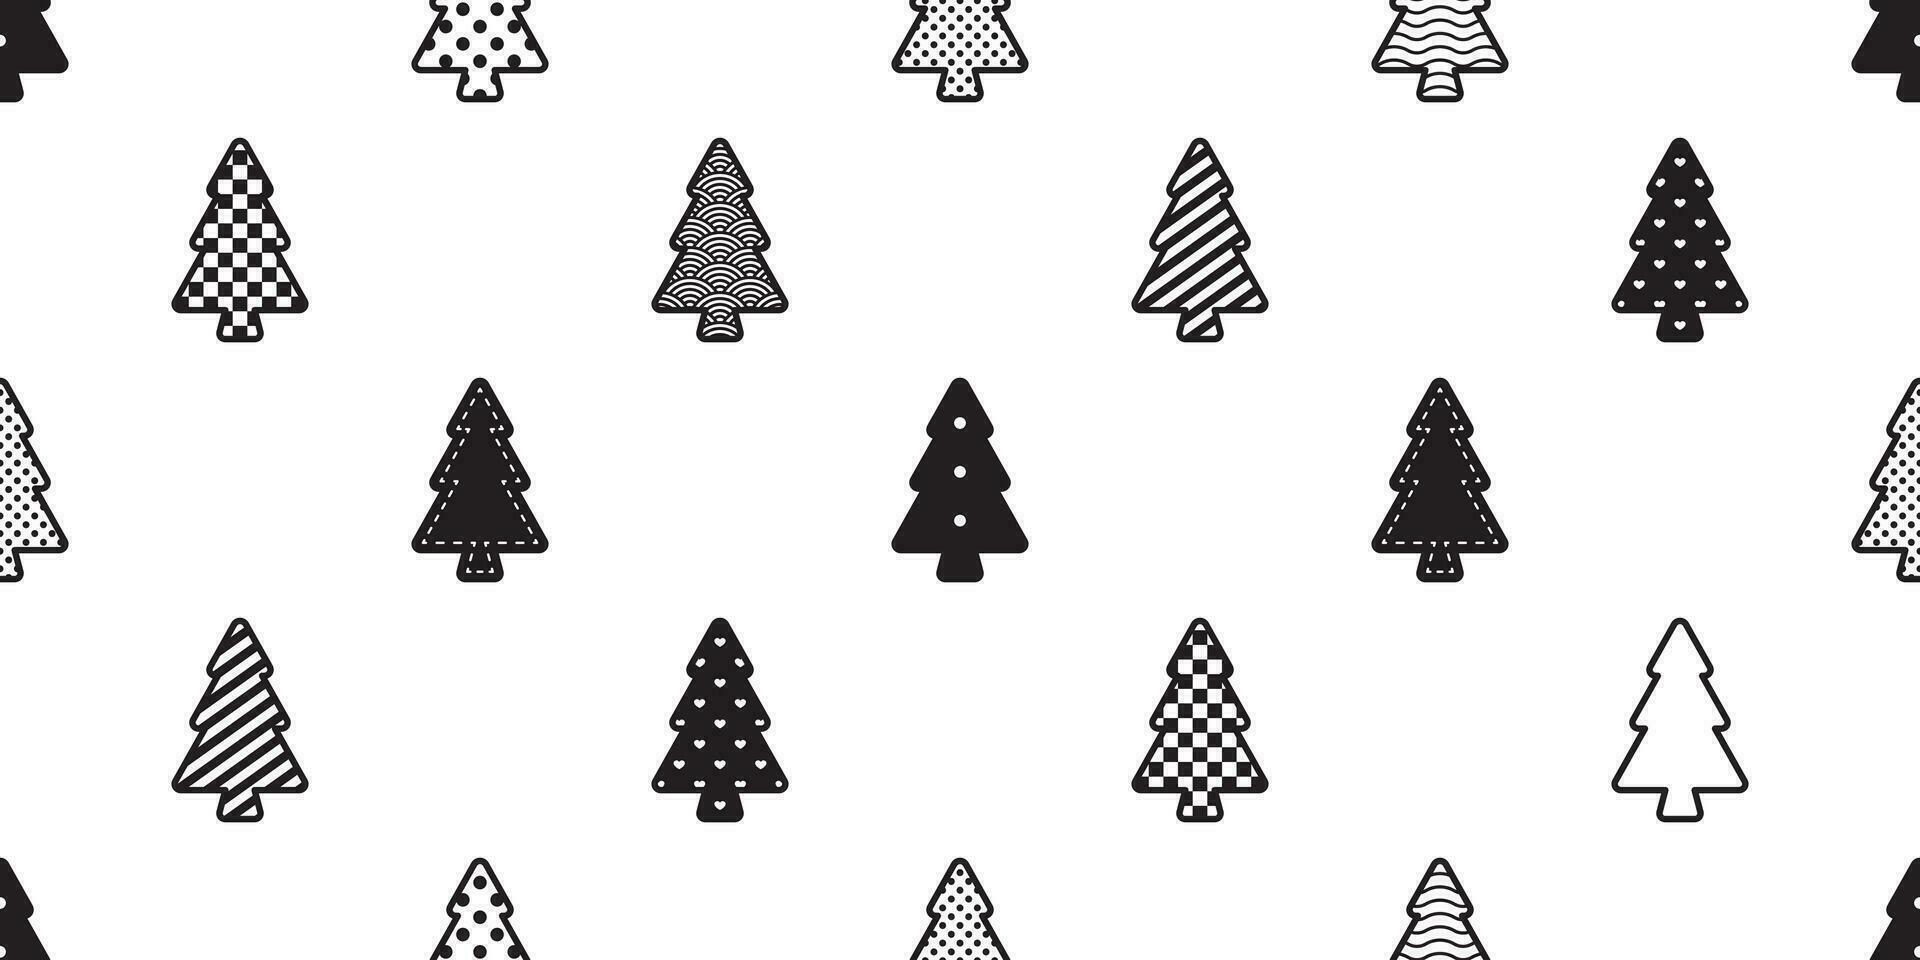 christmas tree seamless pattern vector checked polka dot striped heart wood forest scarf isolated cartoon tile wallpaper repeat background illustration doodle design